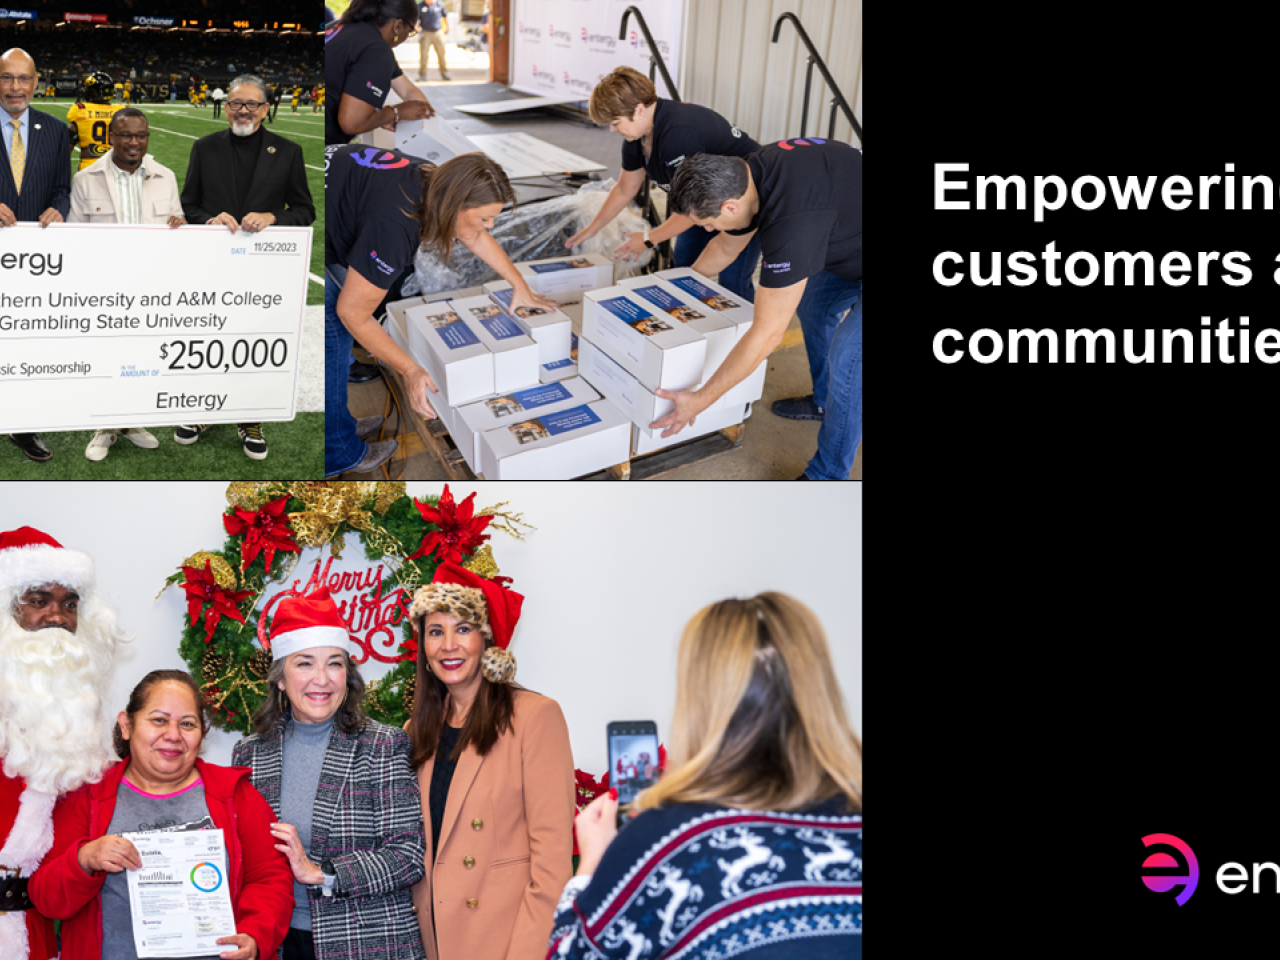 Collage of people holding a large check, volunteers moving boxes, and people posed with Santa. "Empowering our customers and communities."